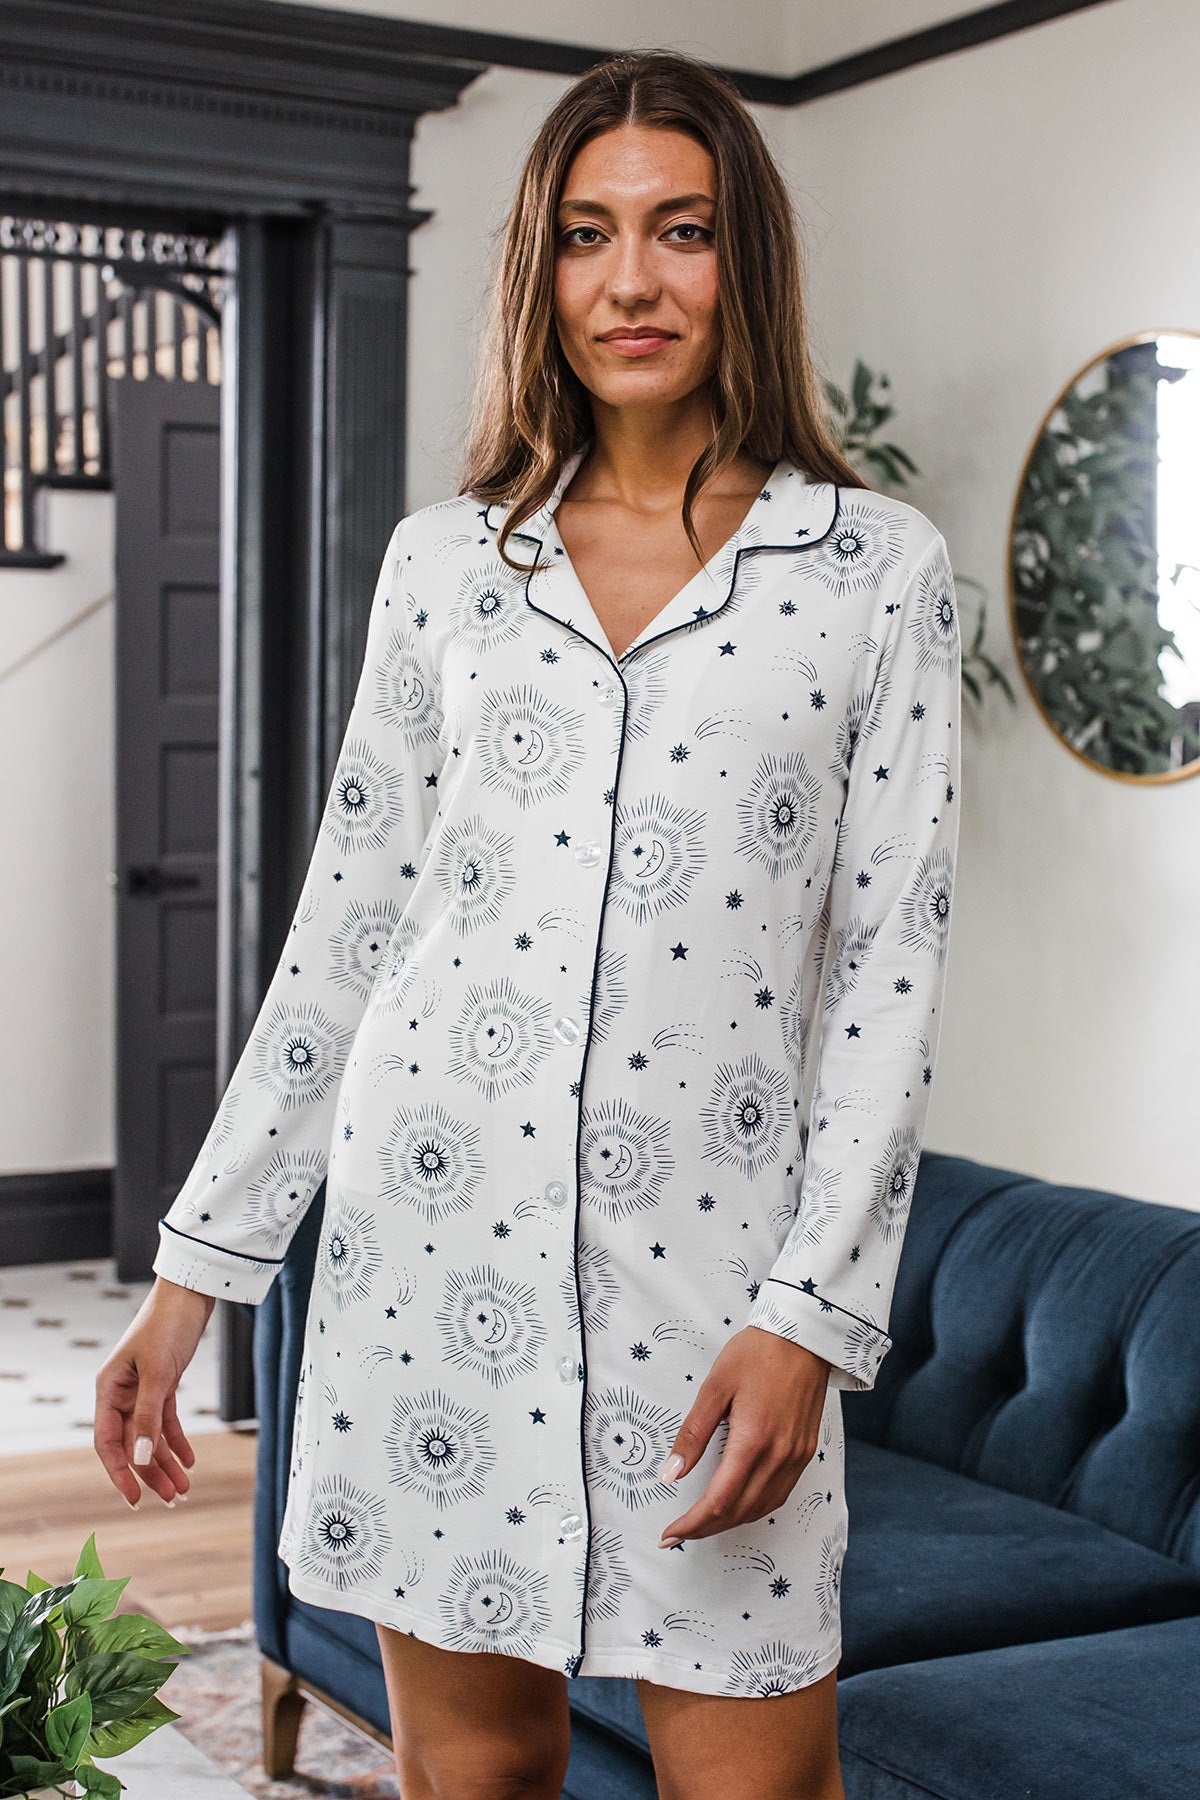 A woman standing while her arms sway, wearing Yala Amber Classic Button Front Bamboo Nightshirt in Celestial Print